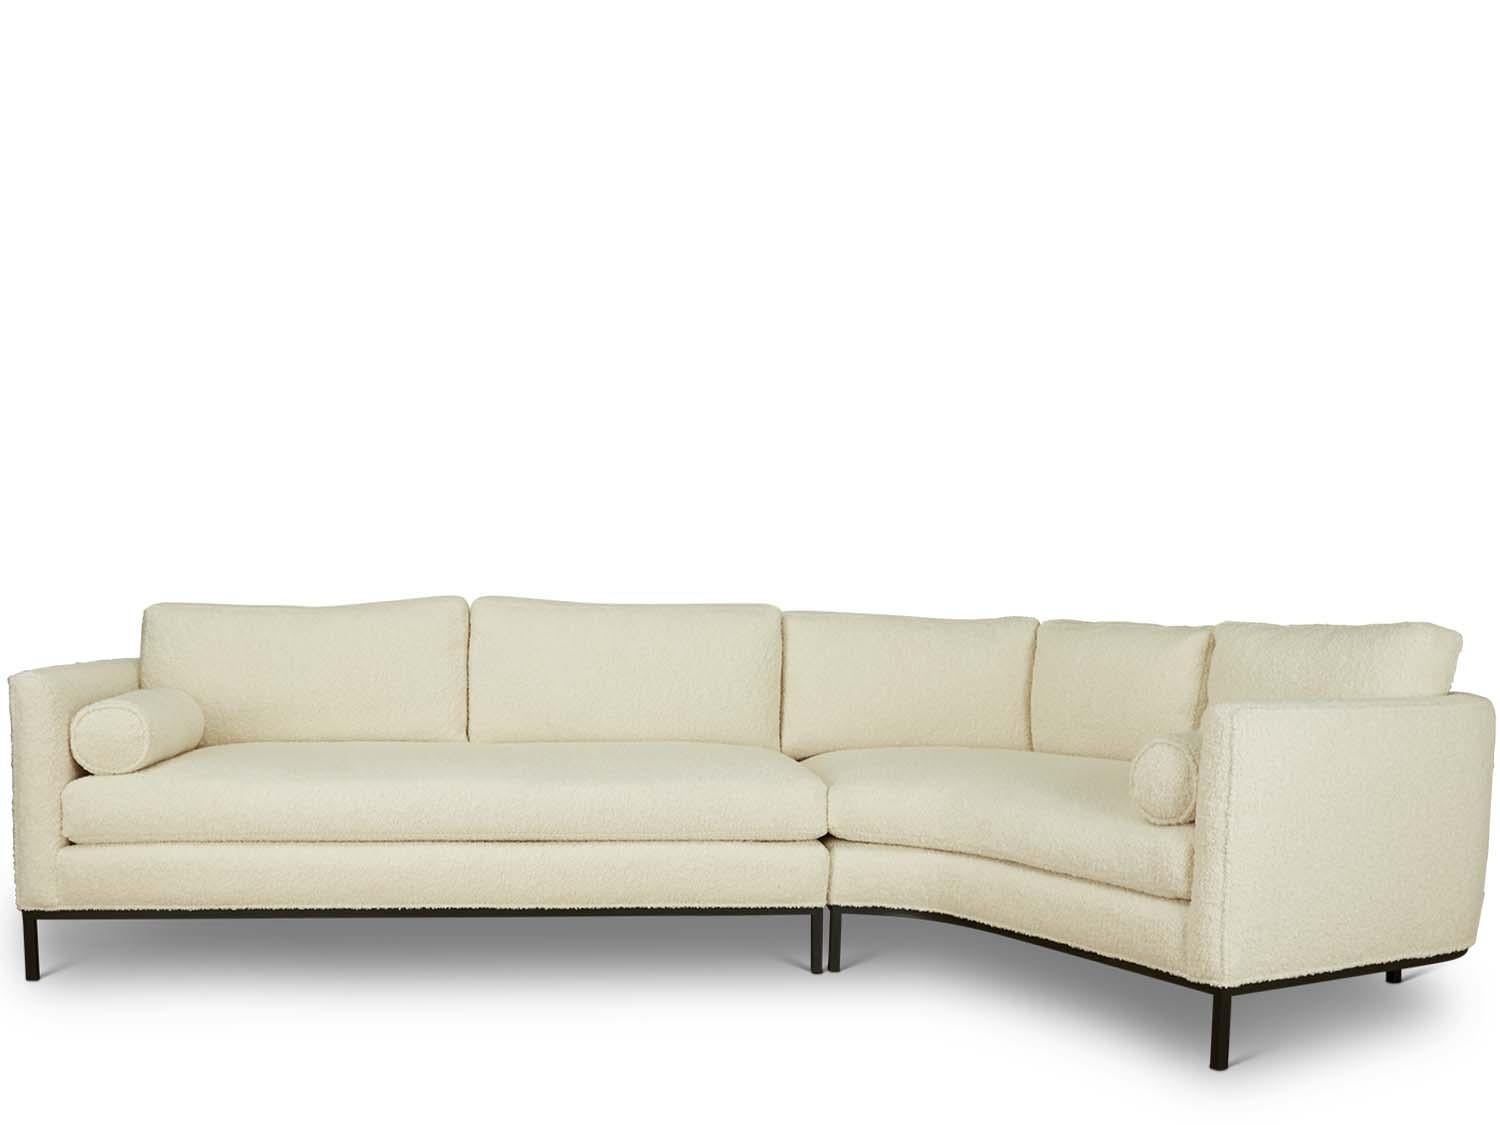 The curved back sectional is a tuxedo style sofa with curved back corners and features down-wrapped, removable seat and back cushions and two bolsters. Can be made with a white oak, American walnut, or metal base.

The Lawson-Fenning collection is